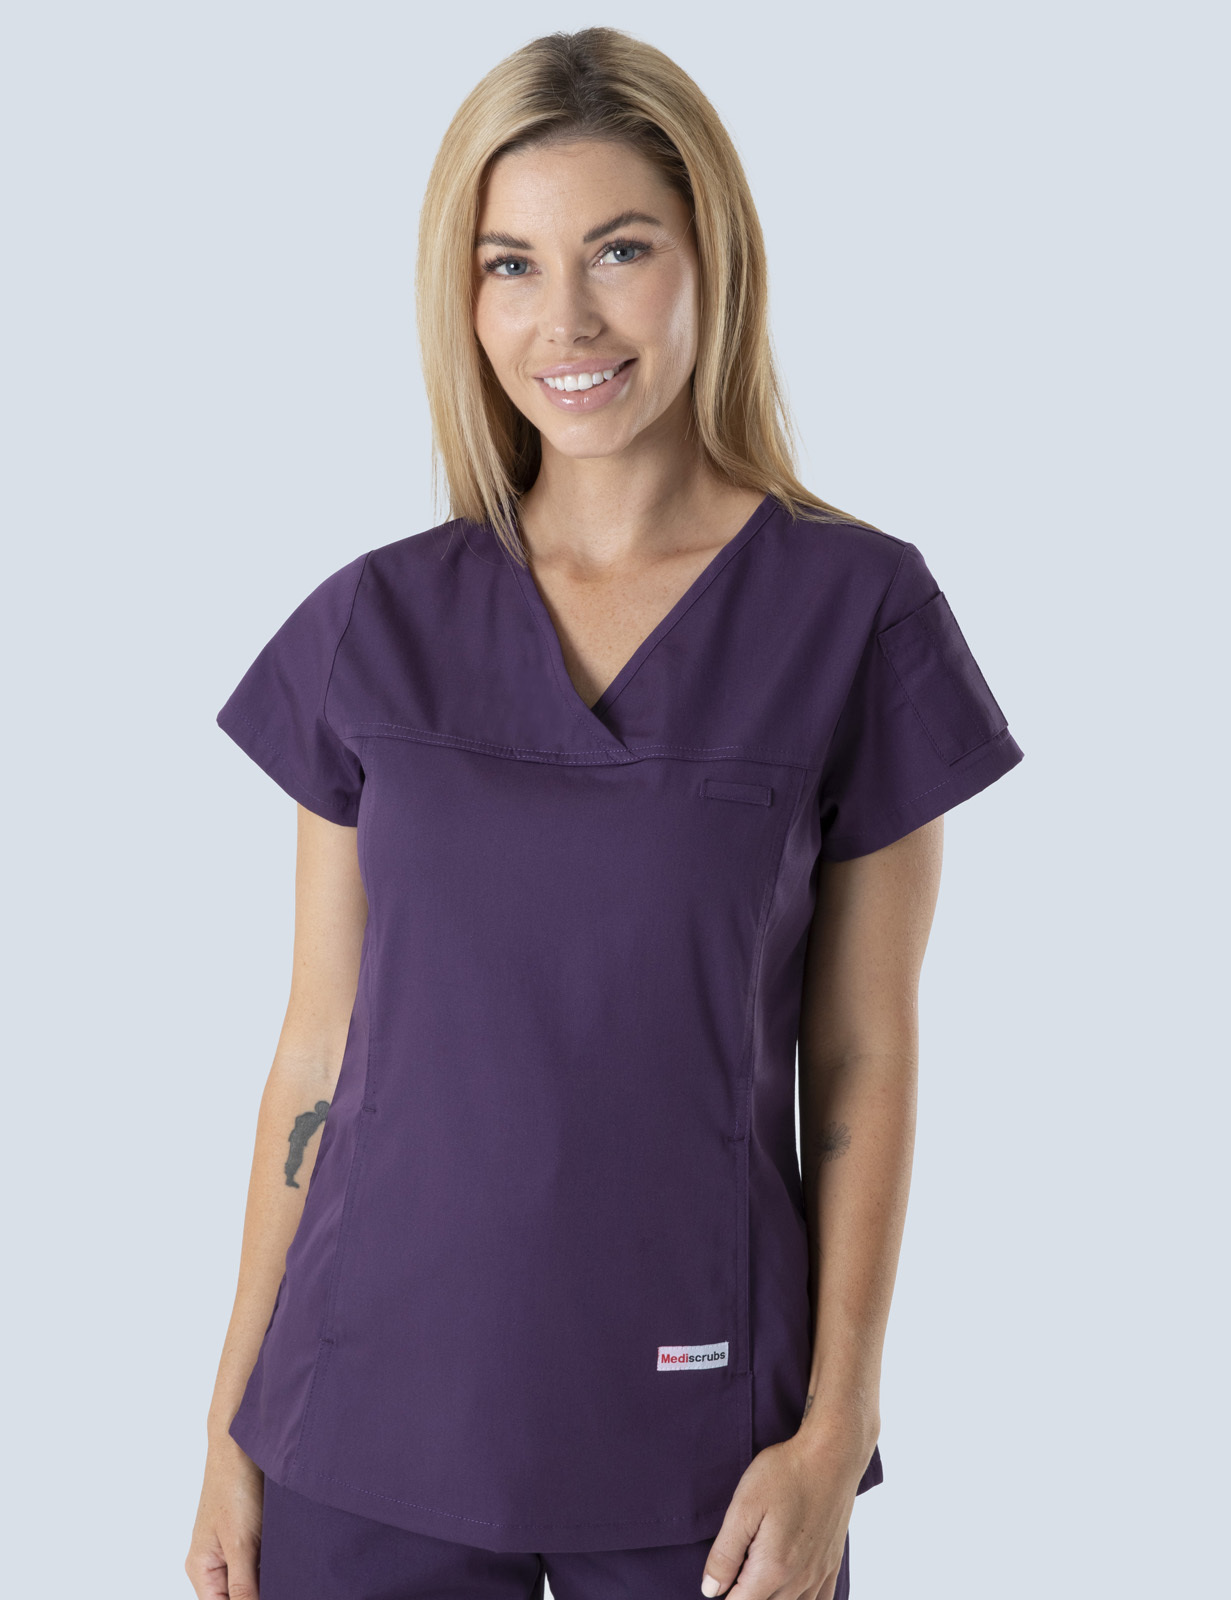 Townsville Hospital Pharmacy Uniform Top Only Bundle) (Women's Fit Solid in Aubergine incl Logos)